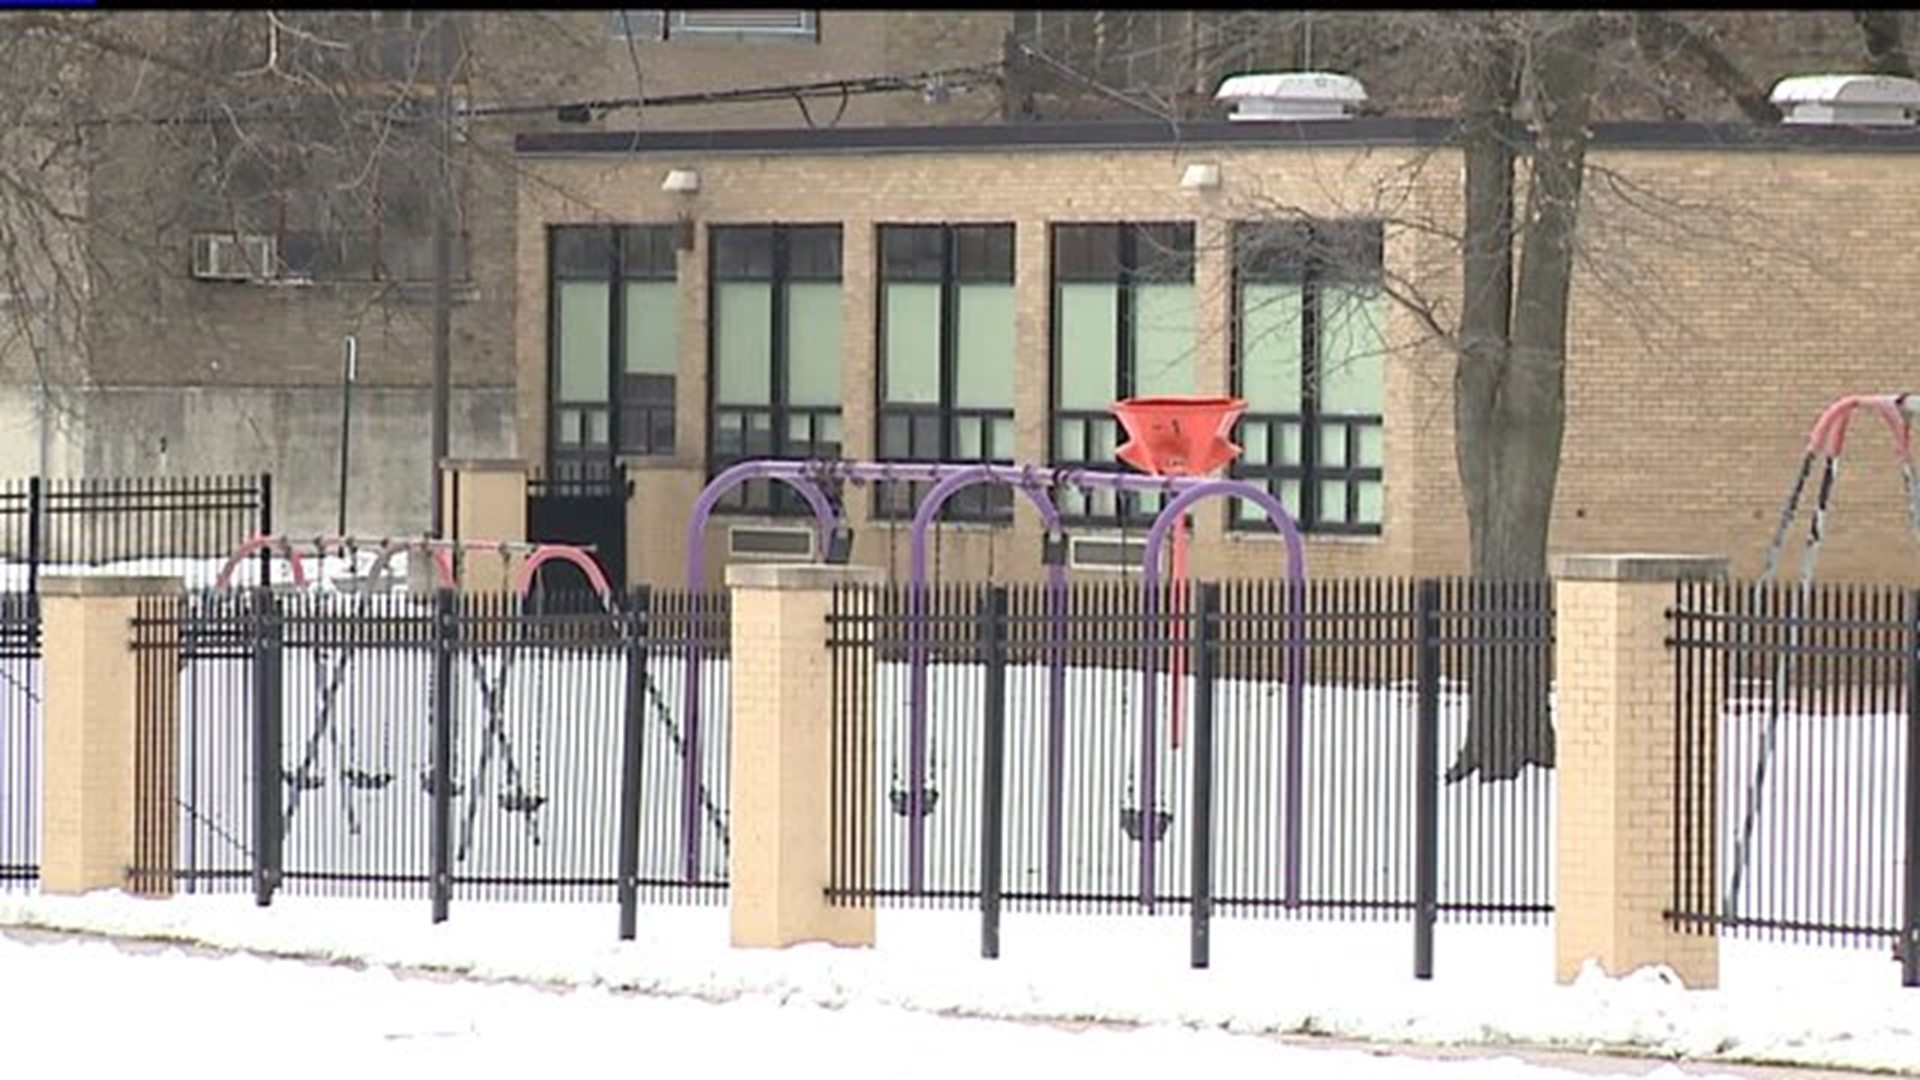 Siemens to conduct air quality tests in Harrisburg School District Buildings